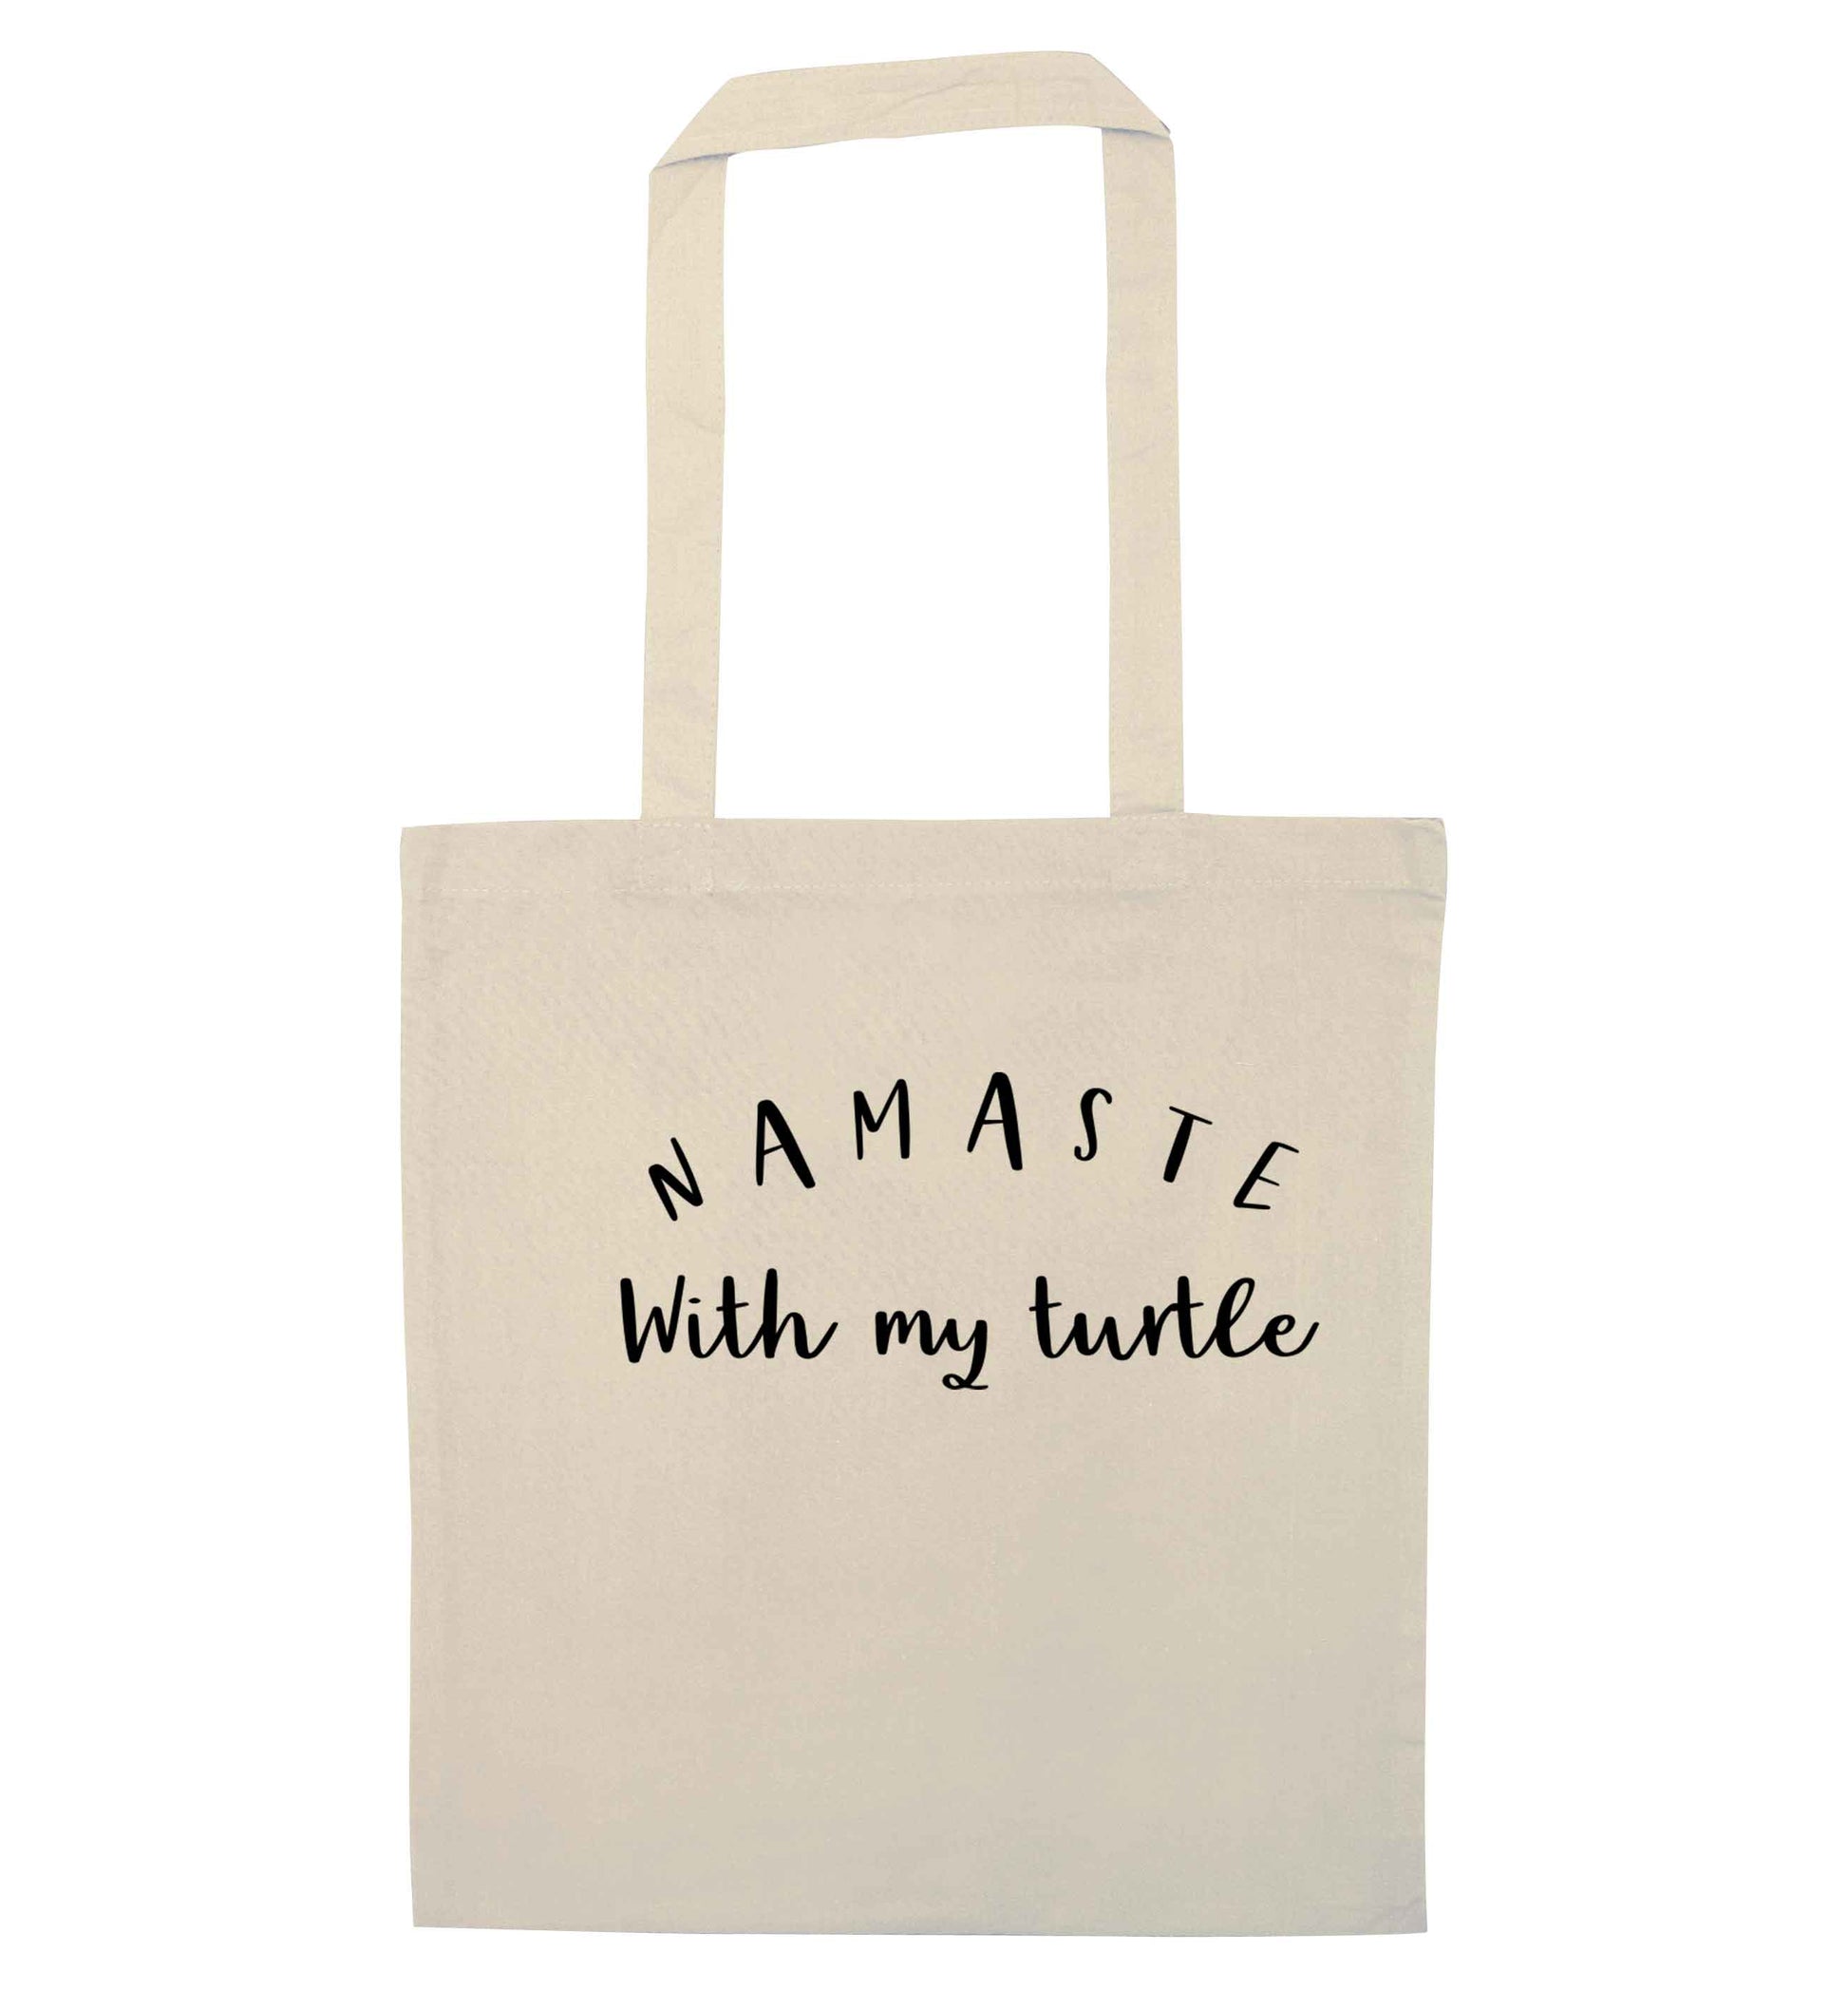 Namaste with my turtle natural tote bag